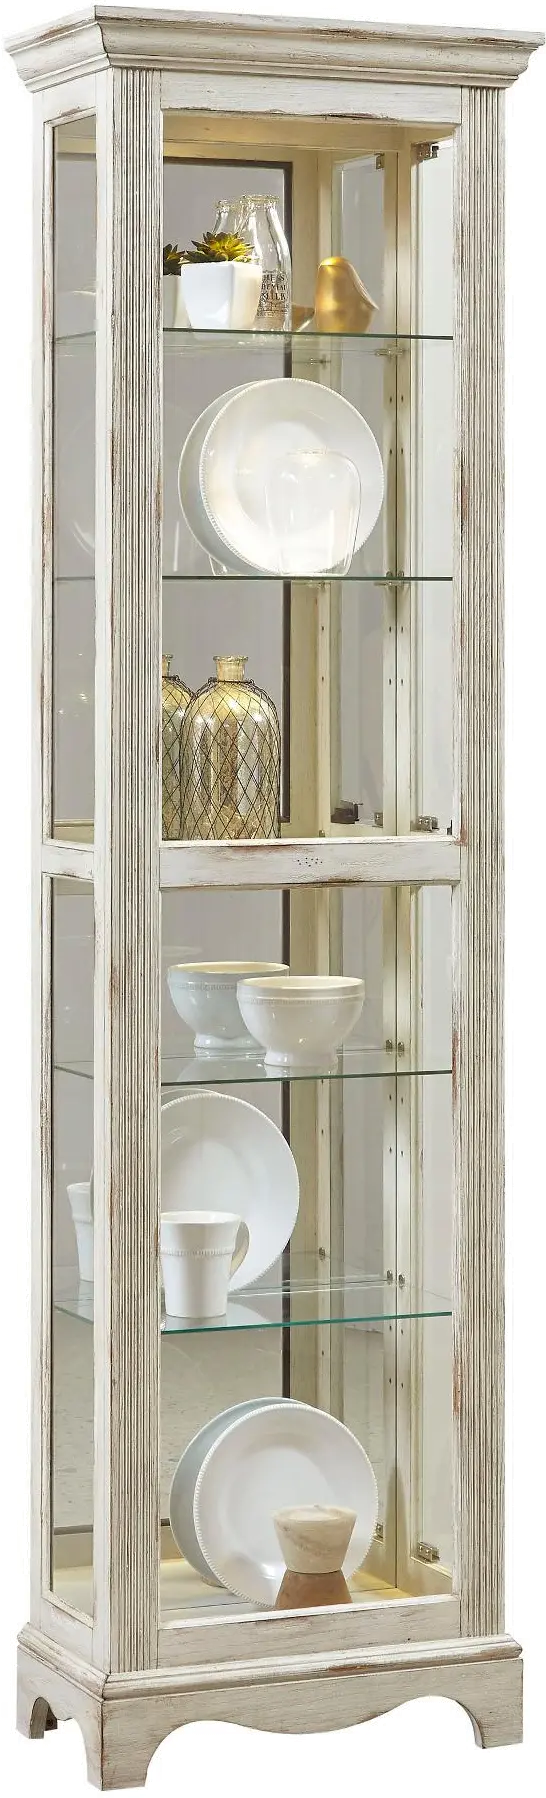 Weathered White Curio Cabinet